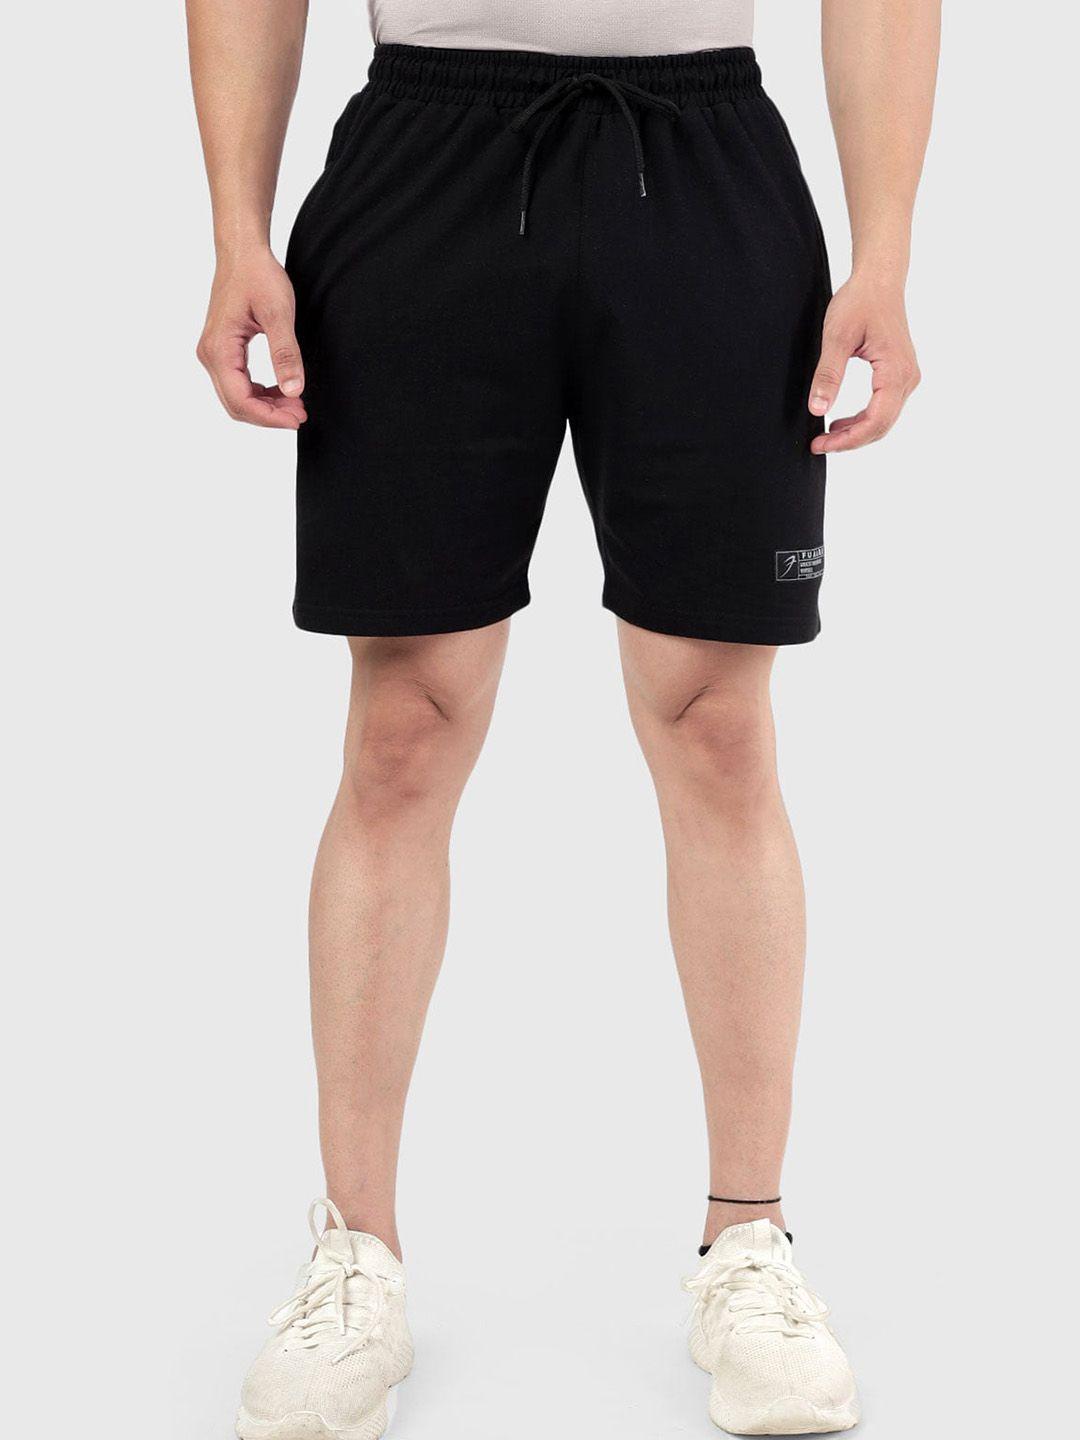 fuaark-men-slim-fit-training-or-gym-sports-shorts-with-antimicrobial-technology